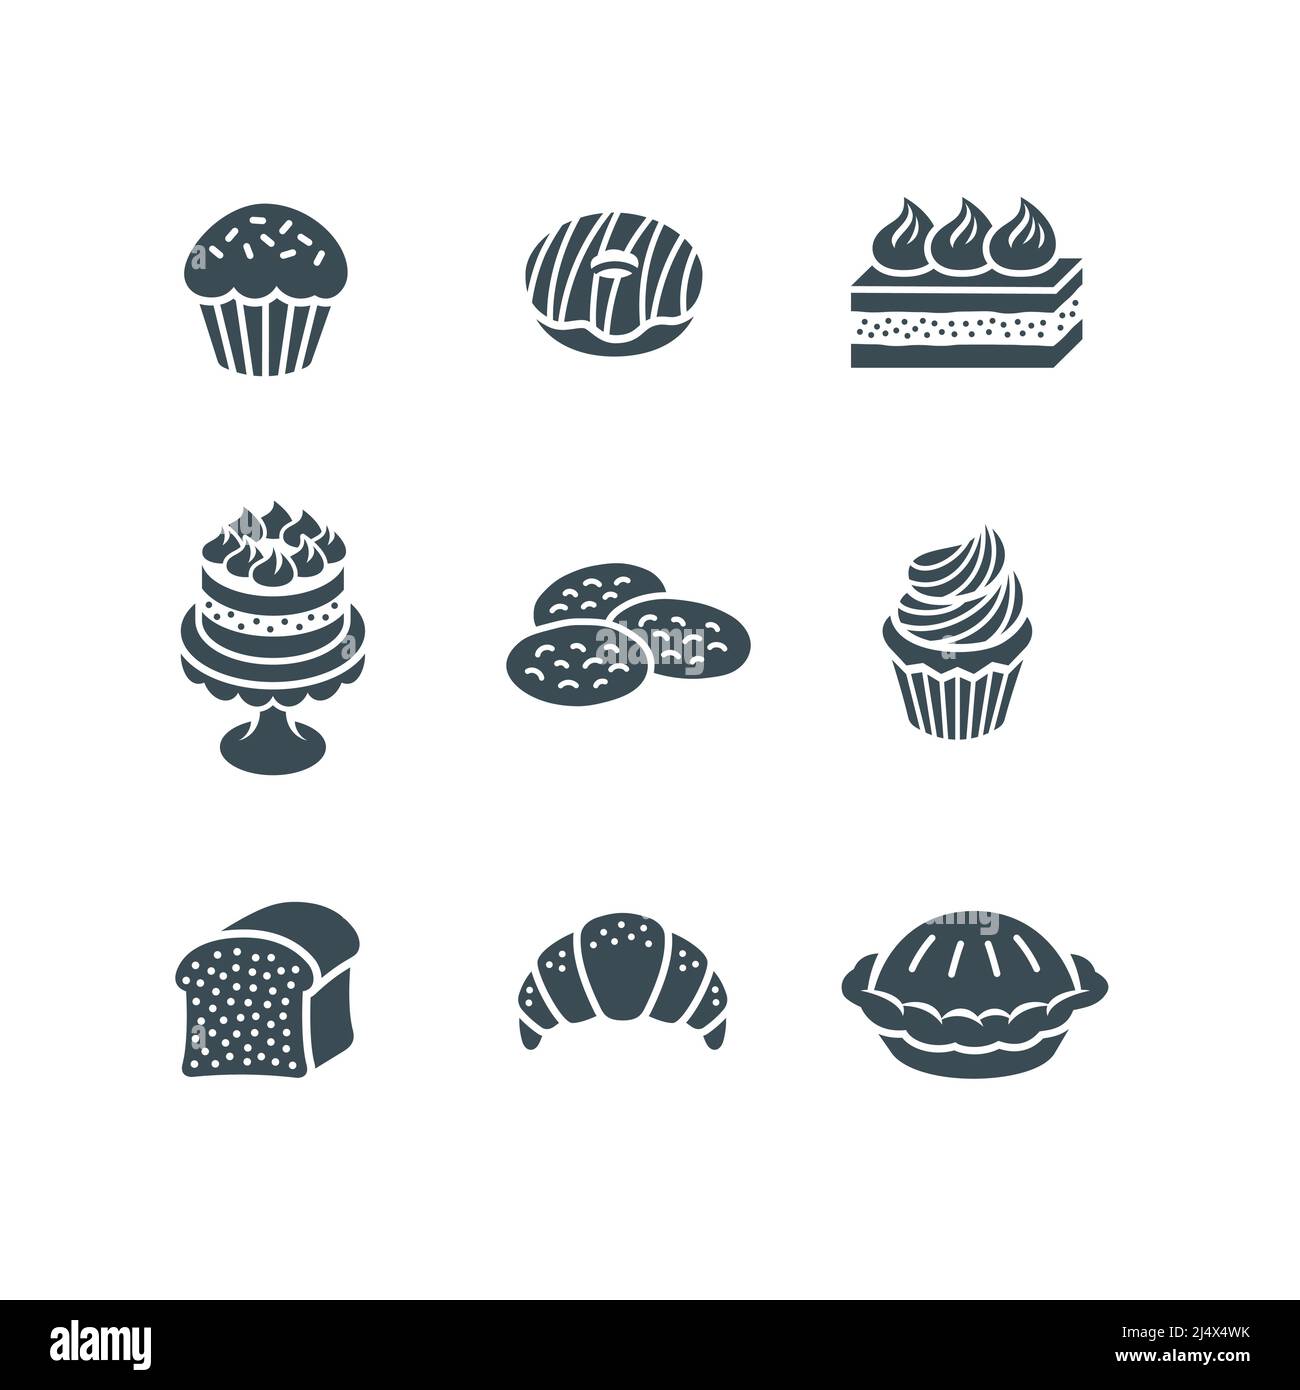 Sweet dessert food icons. Different pastry items pictograms. Simple monochrome silhouette of cupcake, donut, cake, cookie, croissant, bread, pie, muff Stock Vector